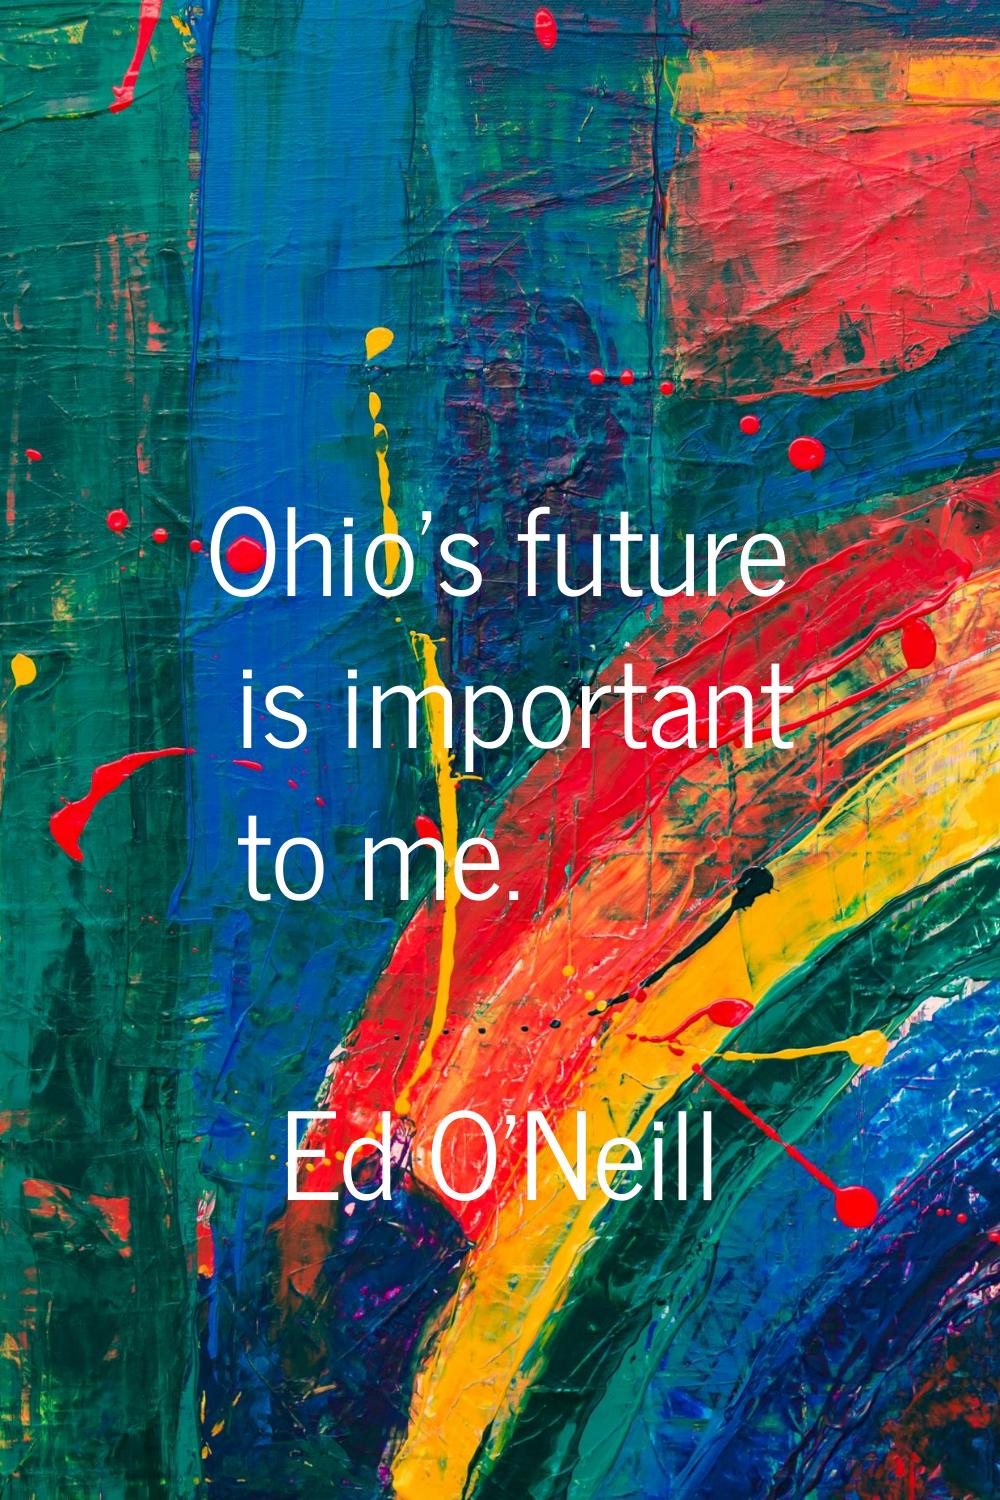 Ohio's future is important to me.